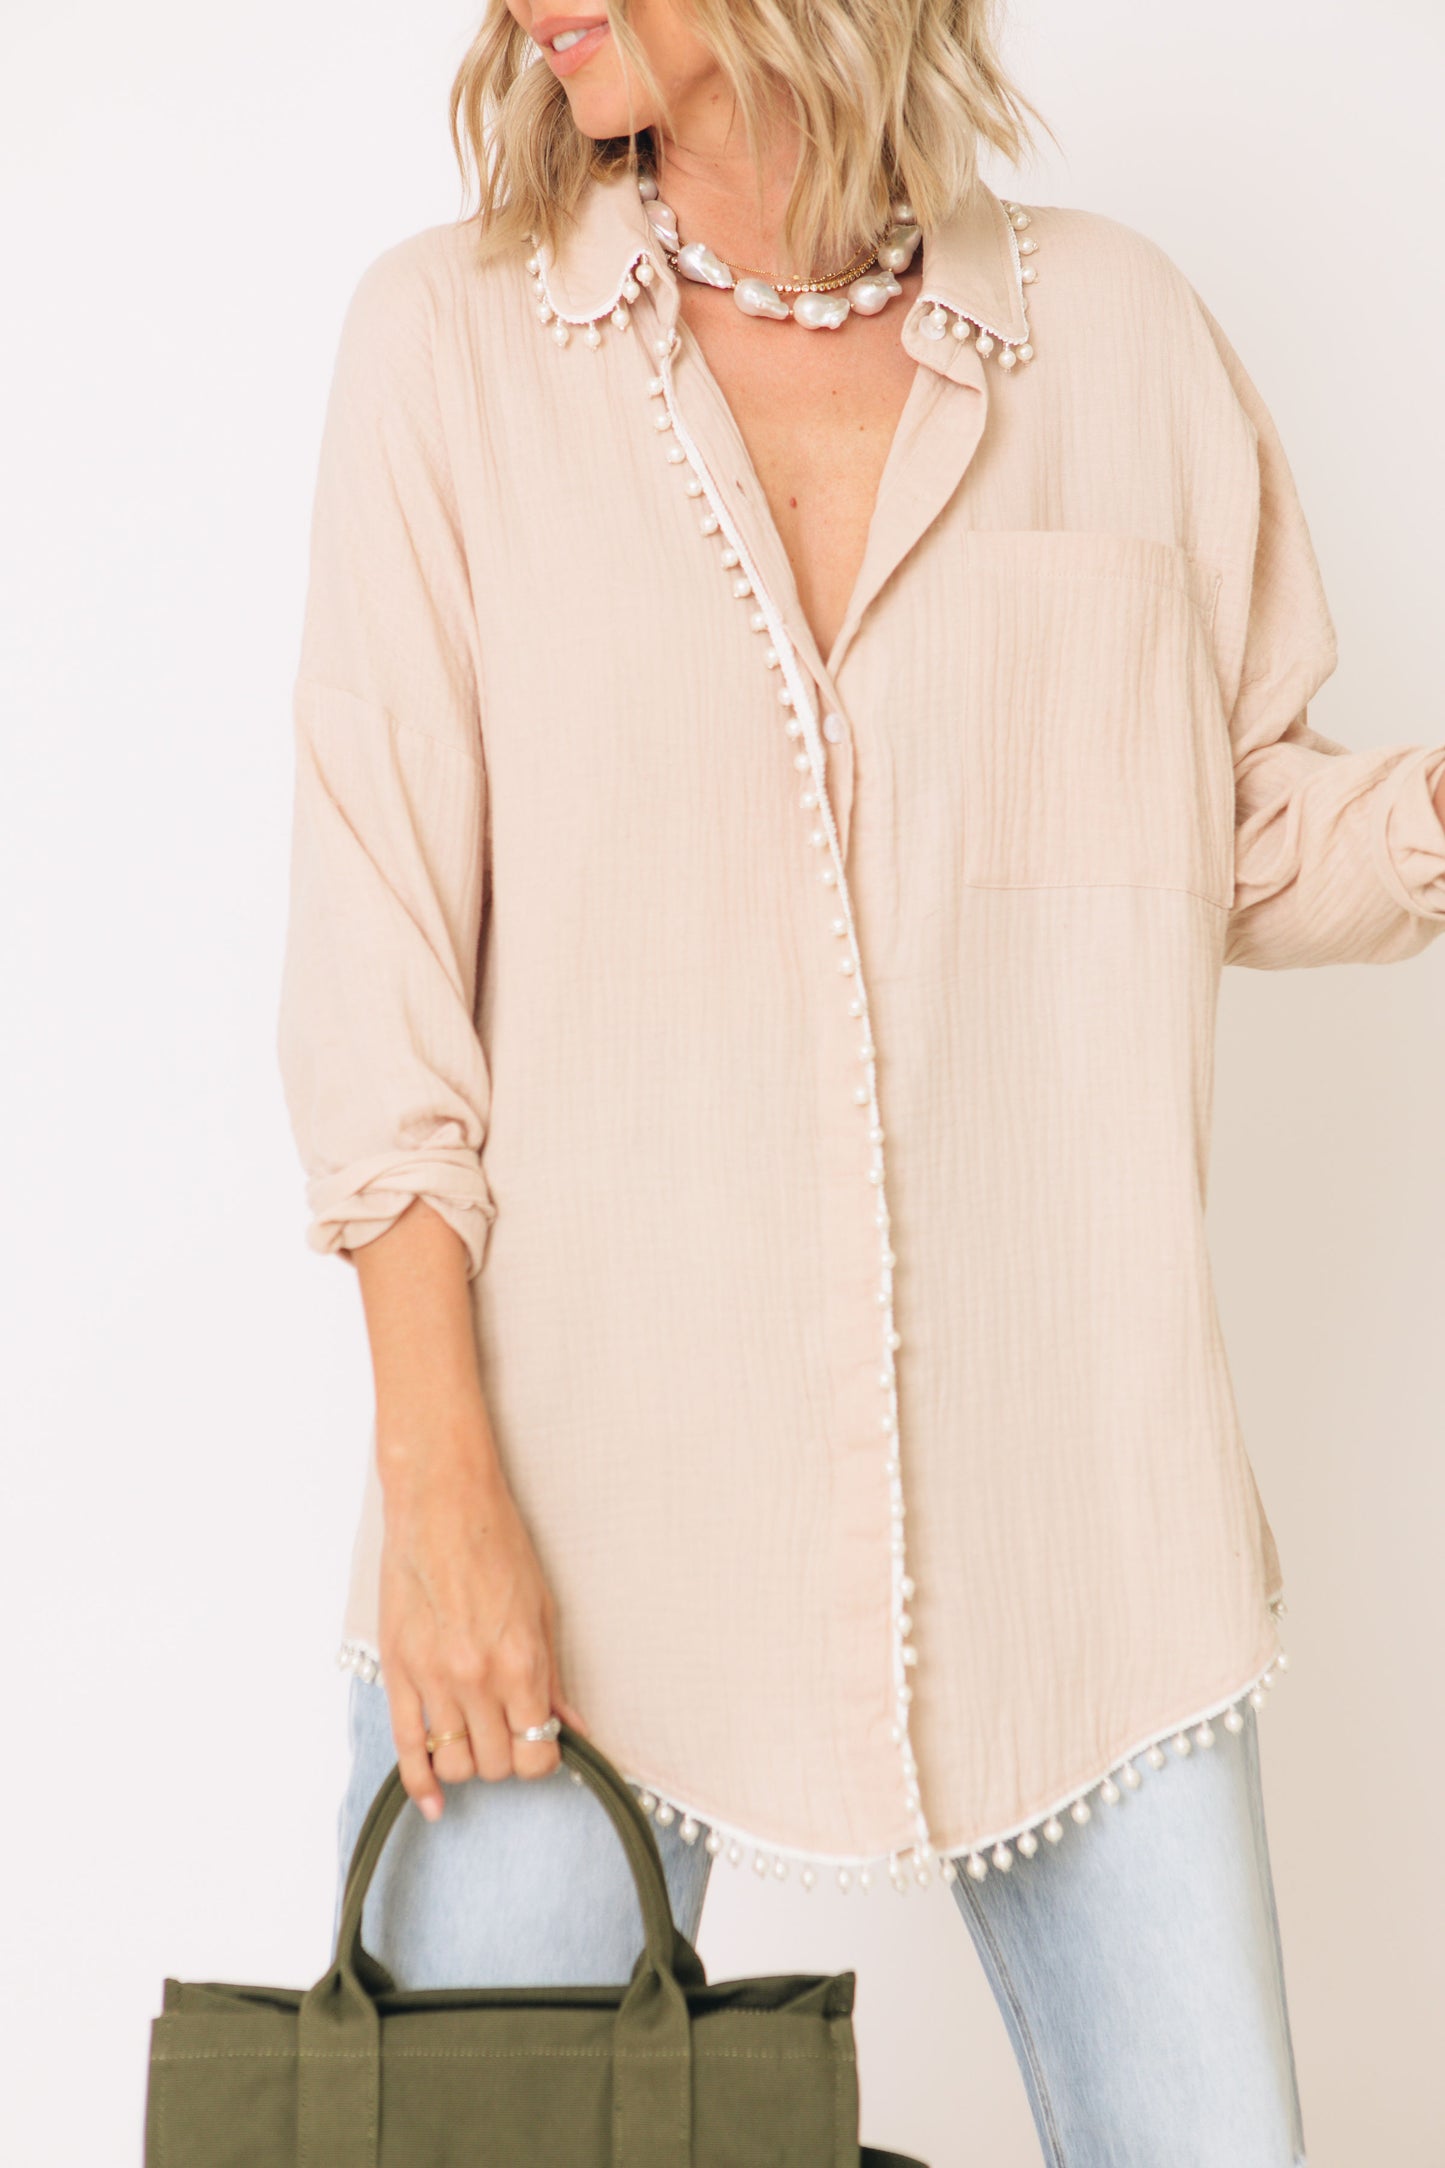 Pearl Embellishment With Hidden Button Up (S-3XL)